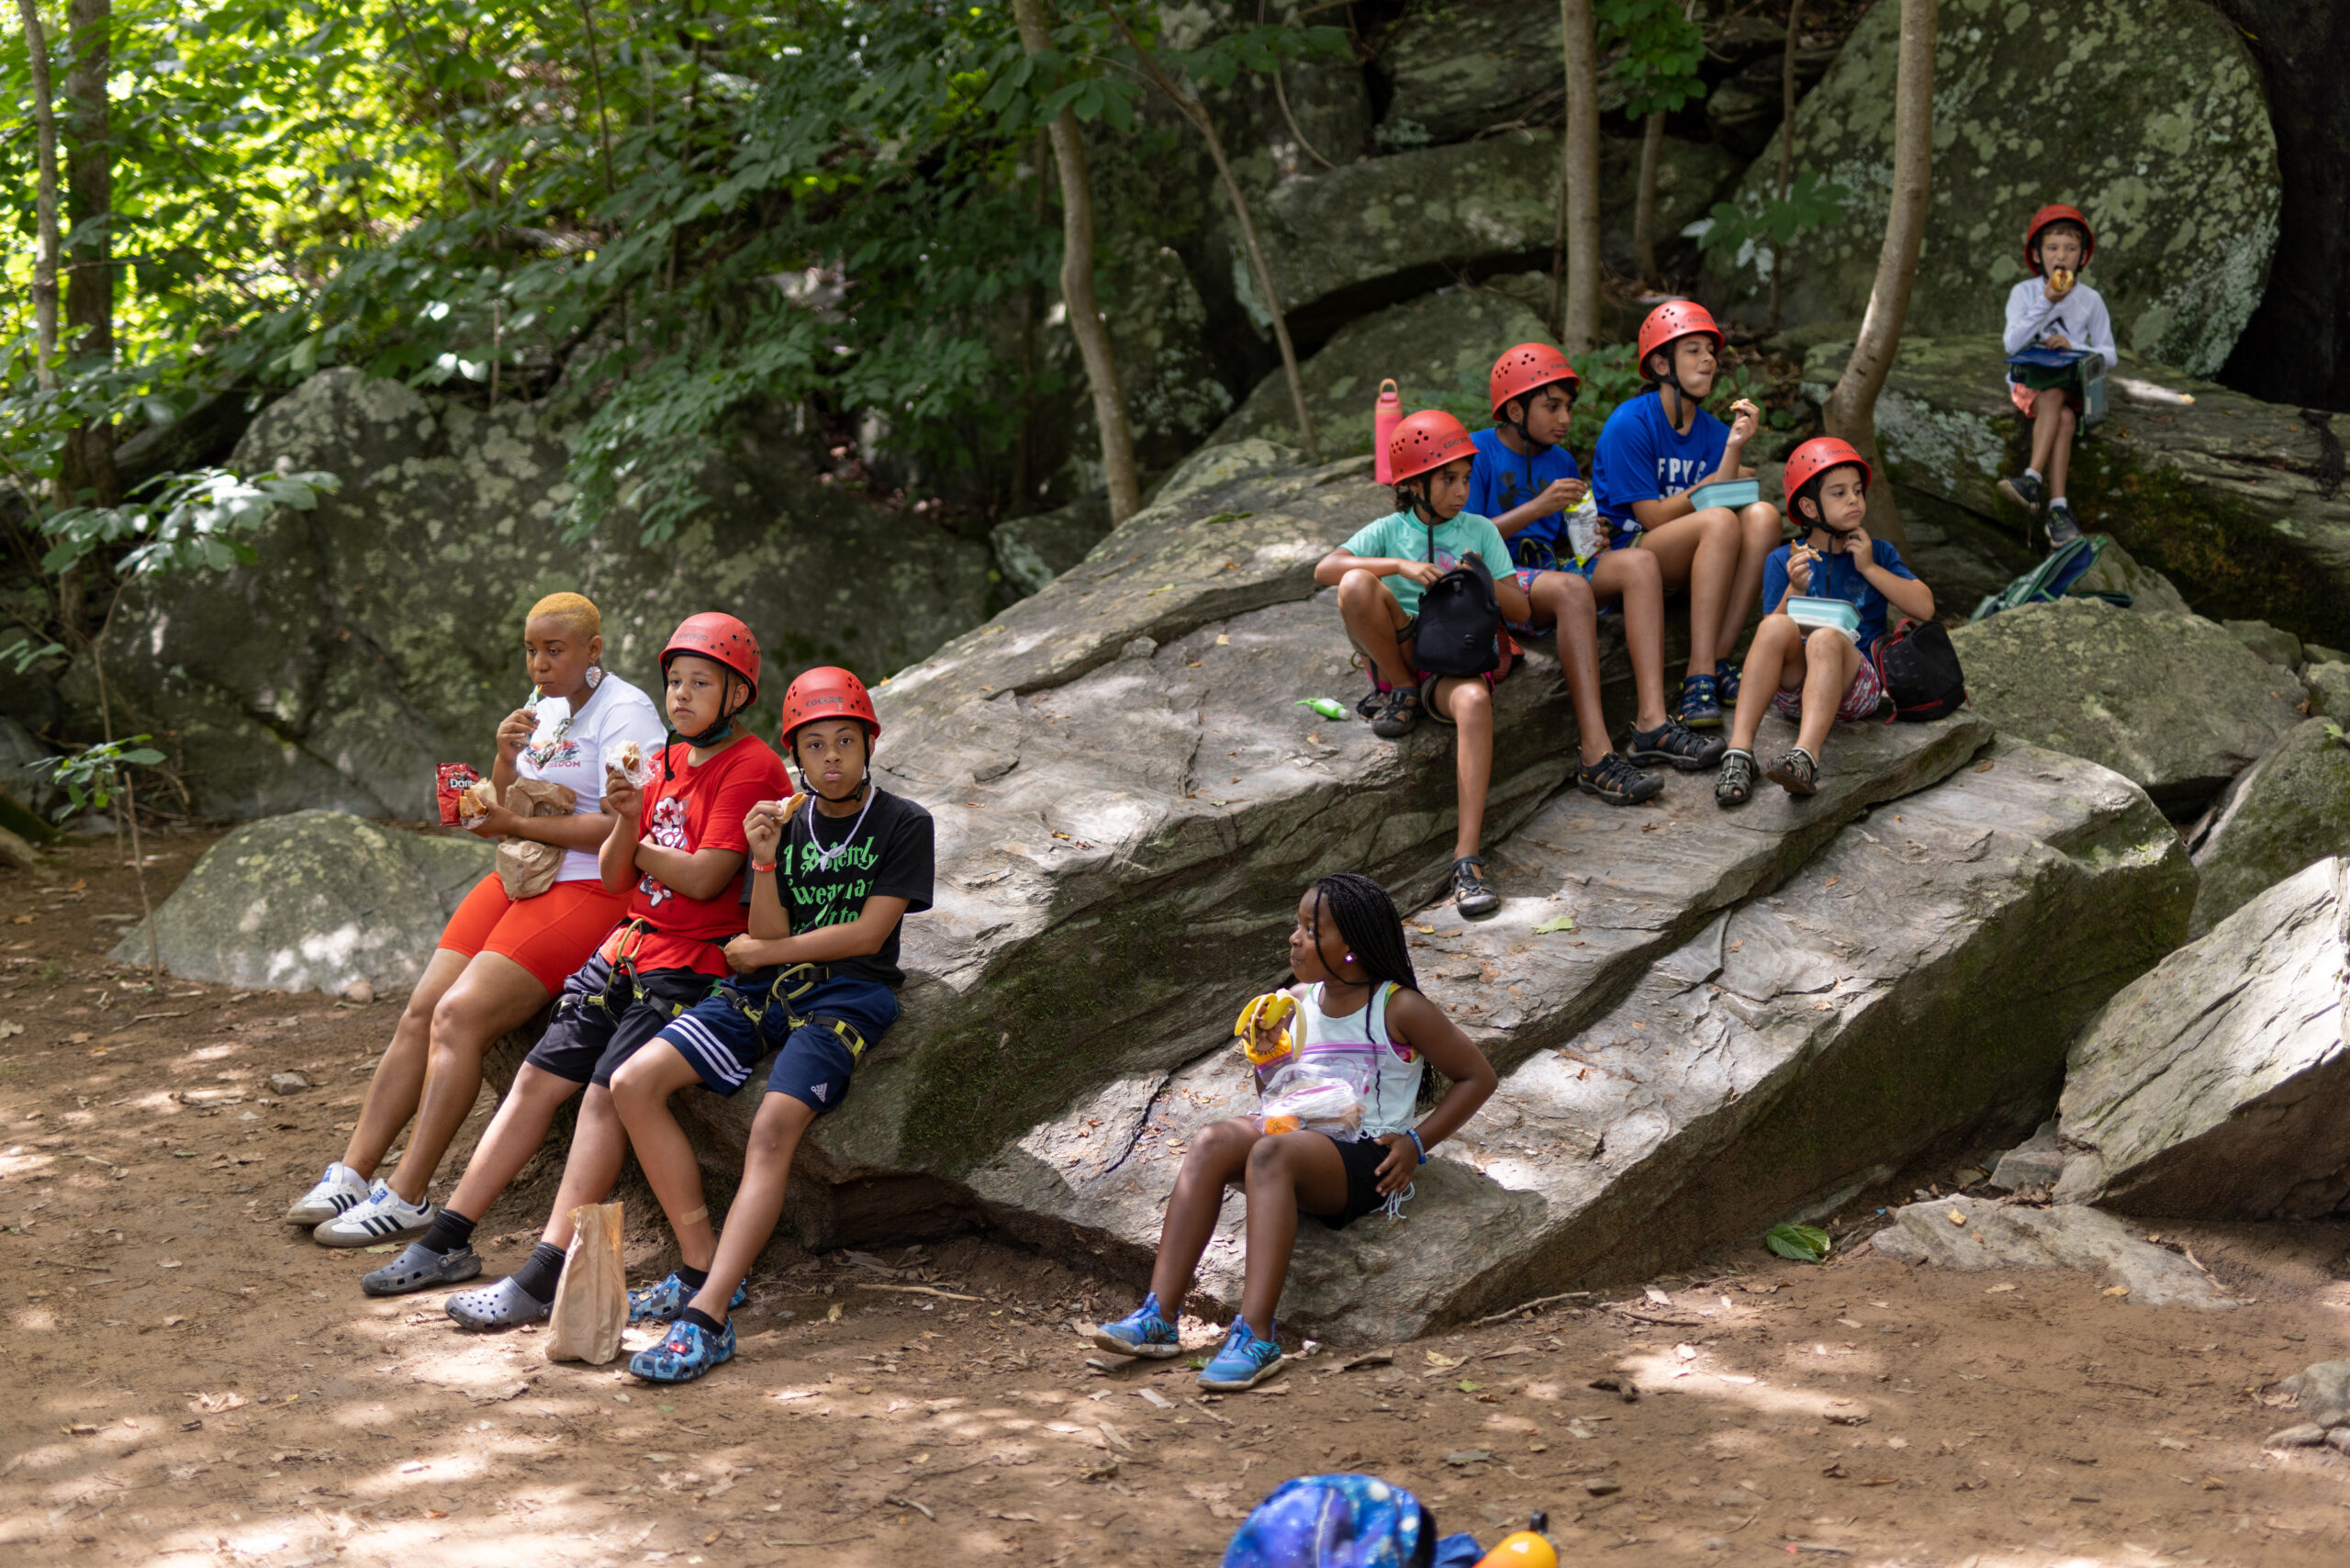 The wide-open spaces along the Potomac are the site of camps created through a partnership between Fairfax NAACP, United Community and Calleva Outdoors that address inequities in access to safe outdoor spaces.